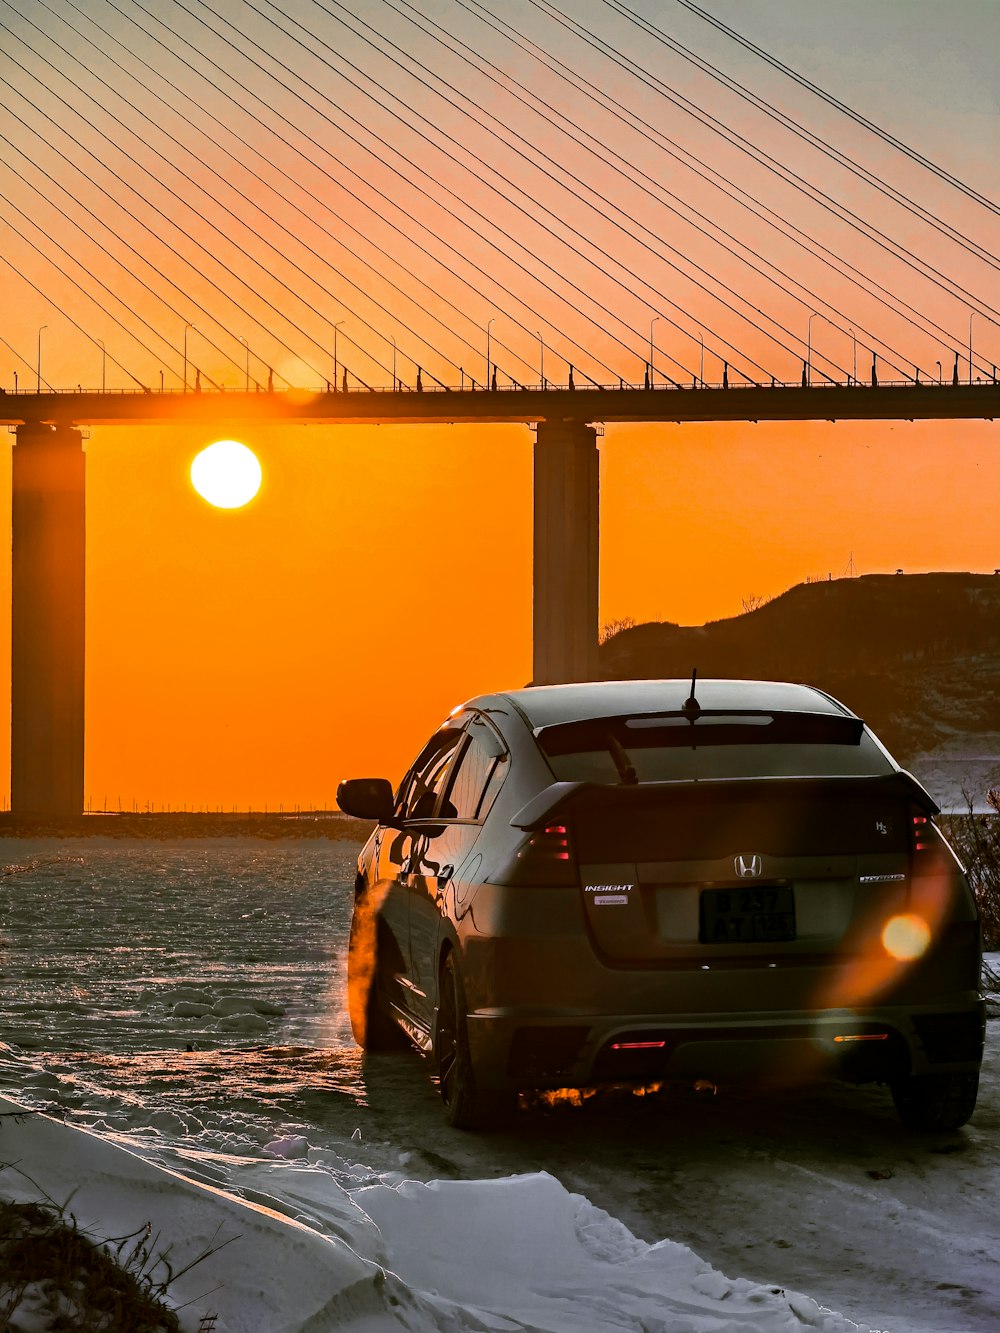 silver bmw m 3 parked on beach shore during sunset